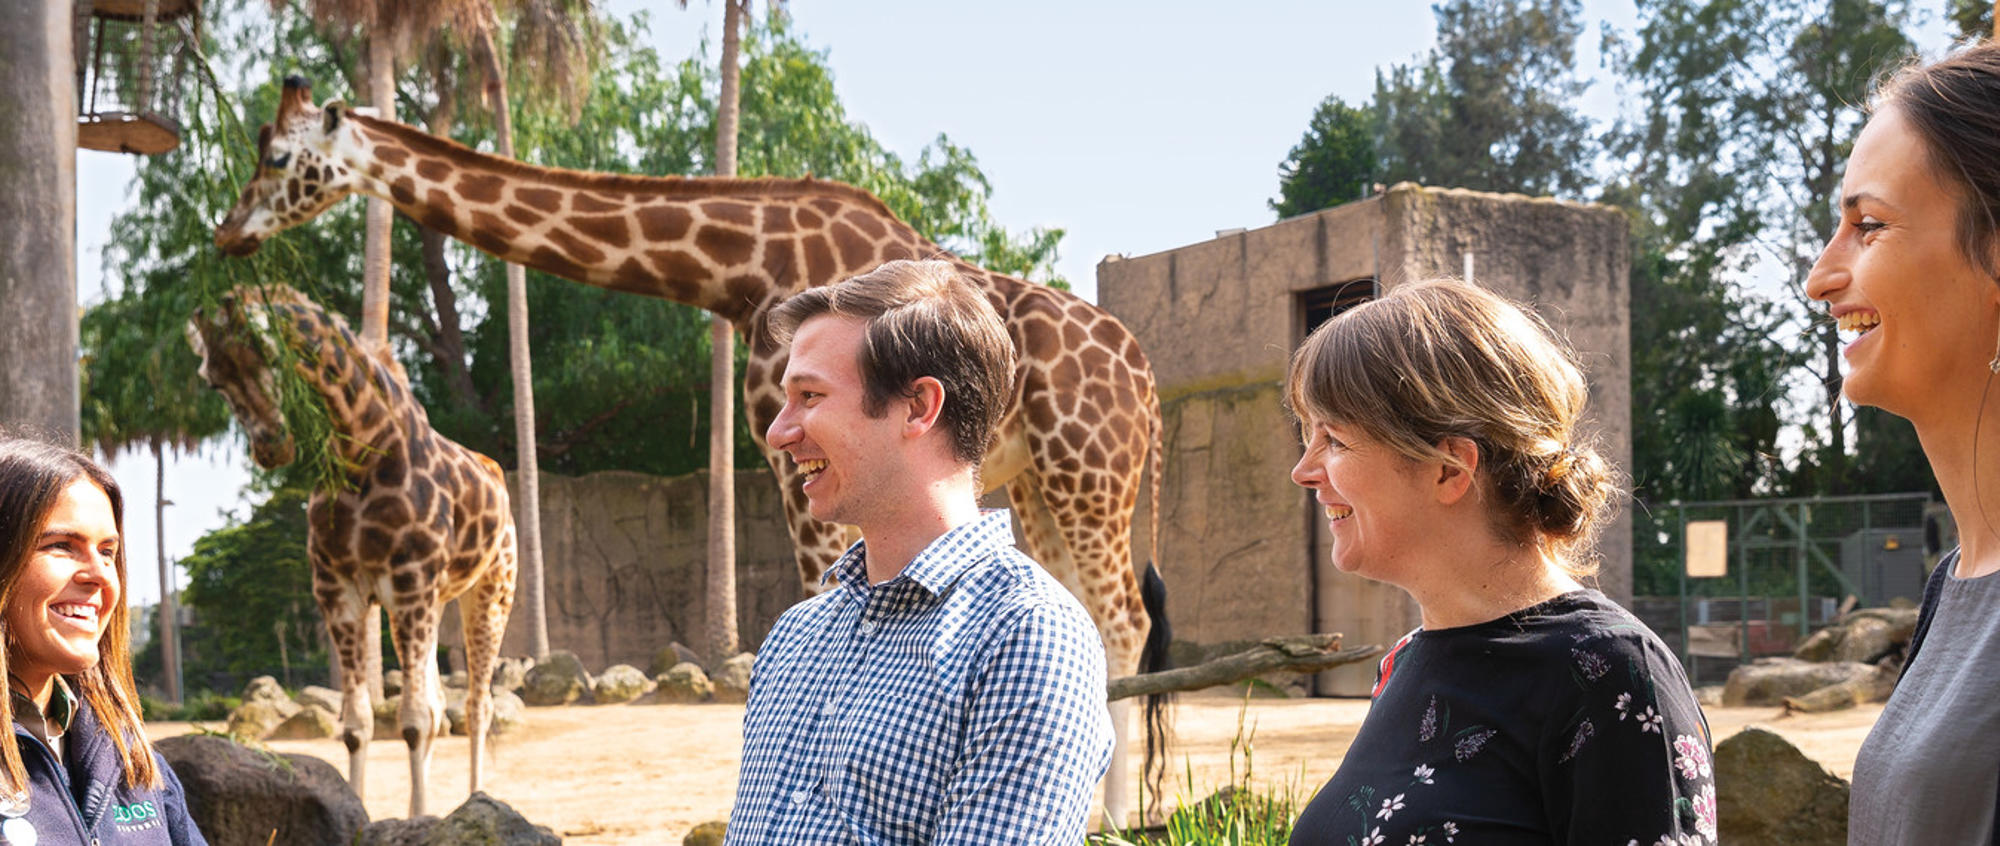 A group of three adults stand alongside a Zoo employee dressed in Zoo uniform stand in front of two giraffes smiling. 